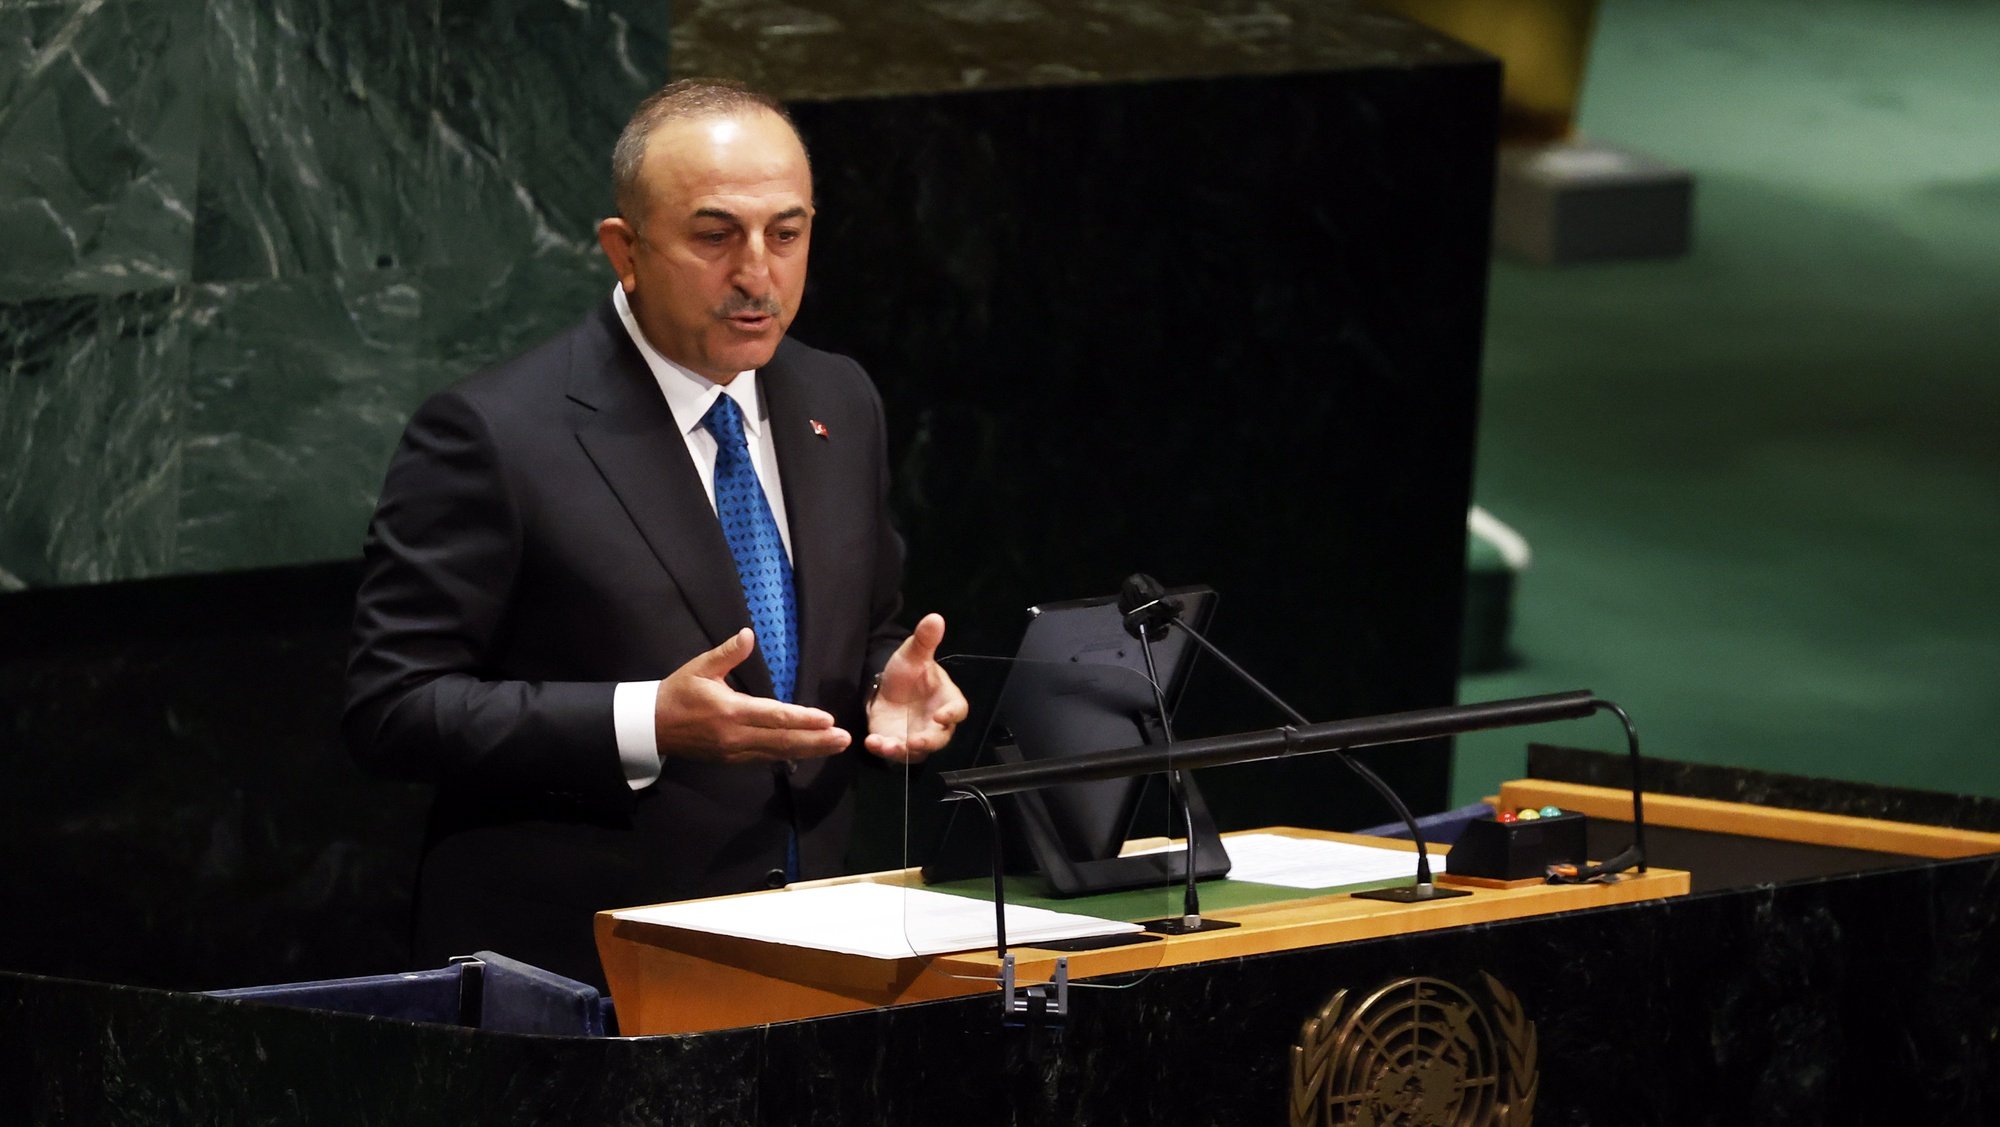 epa09215356 Turkish Foreign Minister Mevlut Cavusoglu addresses the United Nations General Assembly on the situation in the Middle East, including the Palestinian question, at United Nations Headquarters in New York, New York, USA, 20 May 2021.  EPA/JASON SZENES